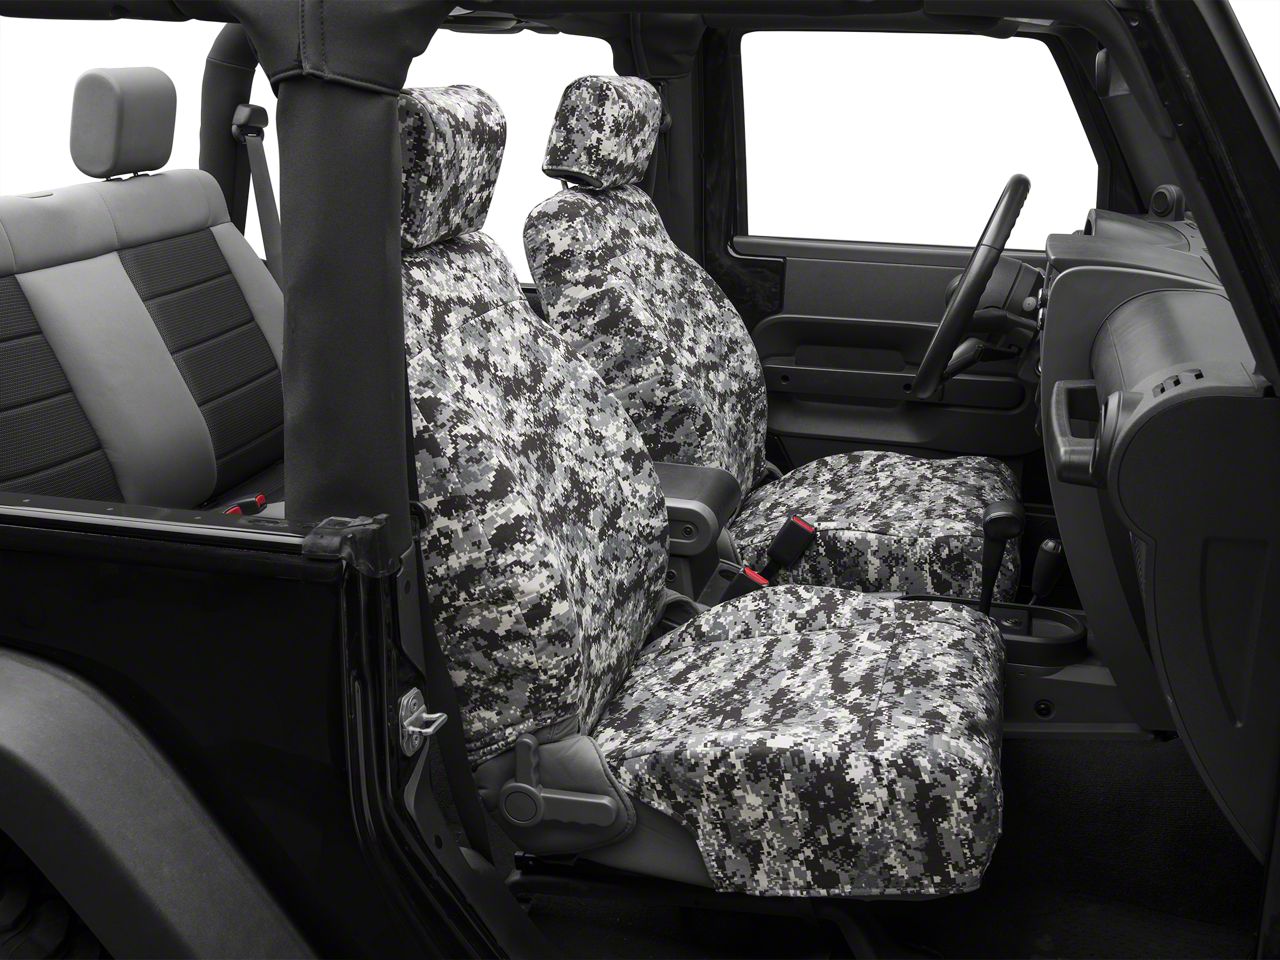 Jeep Wrangler Urban Camouflage Front Seat Covers W Airbags 07 10 Jk 2 Door - 2010 Jeep Wrangler Camo Seat Covers